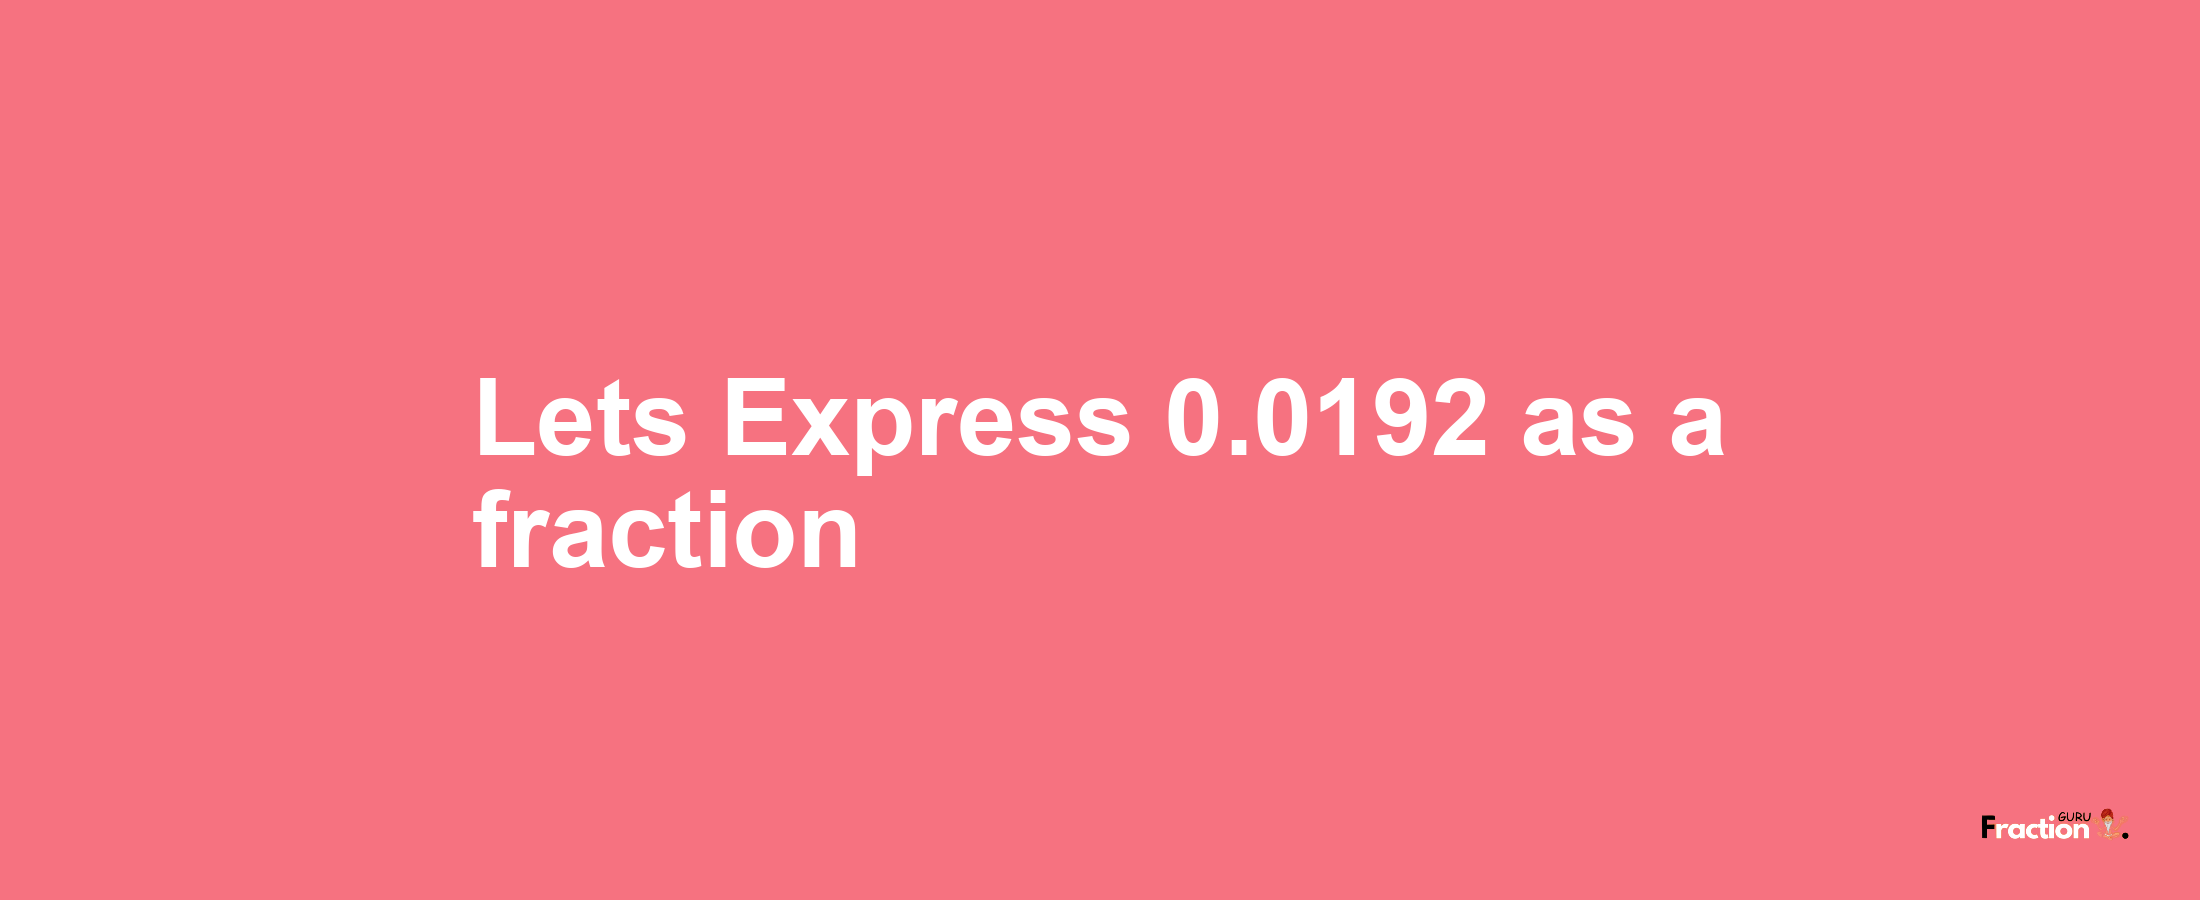 Lets Express 0.0192 as afraction